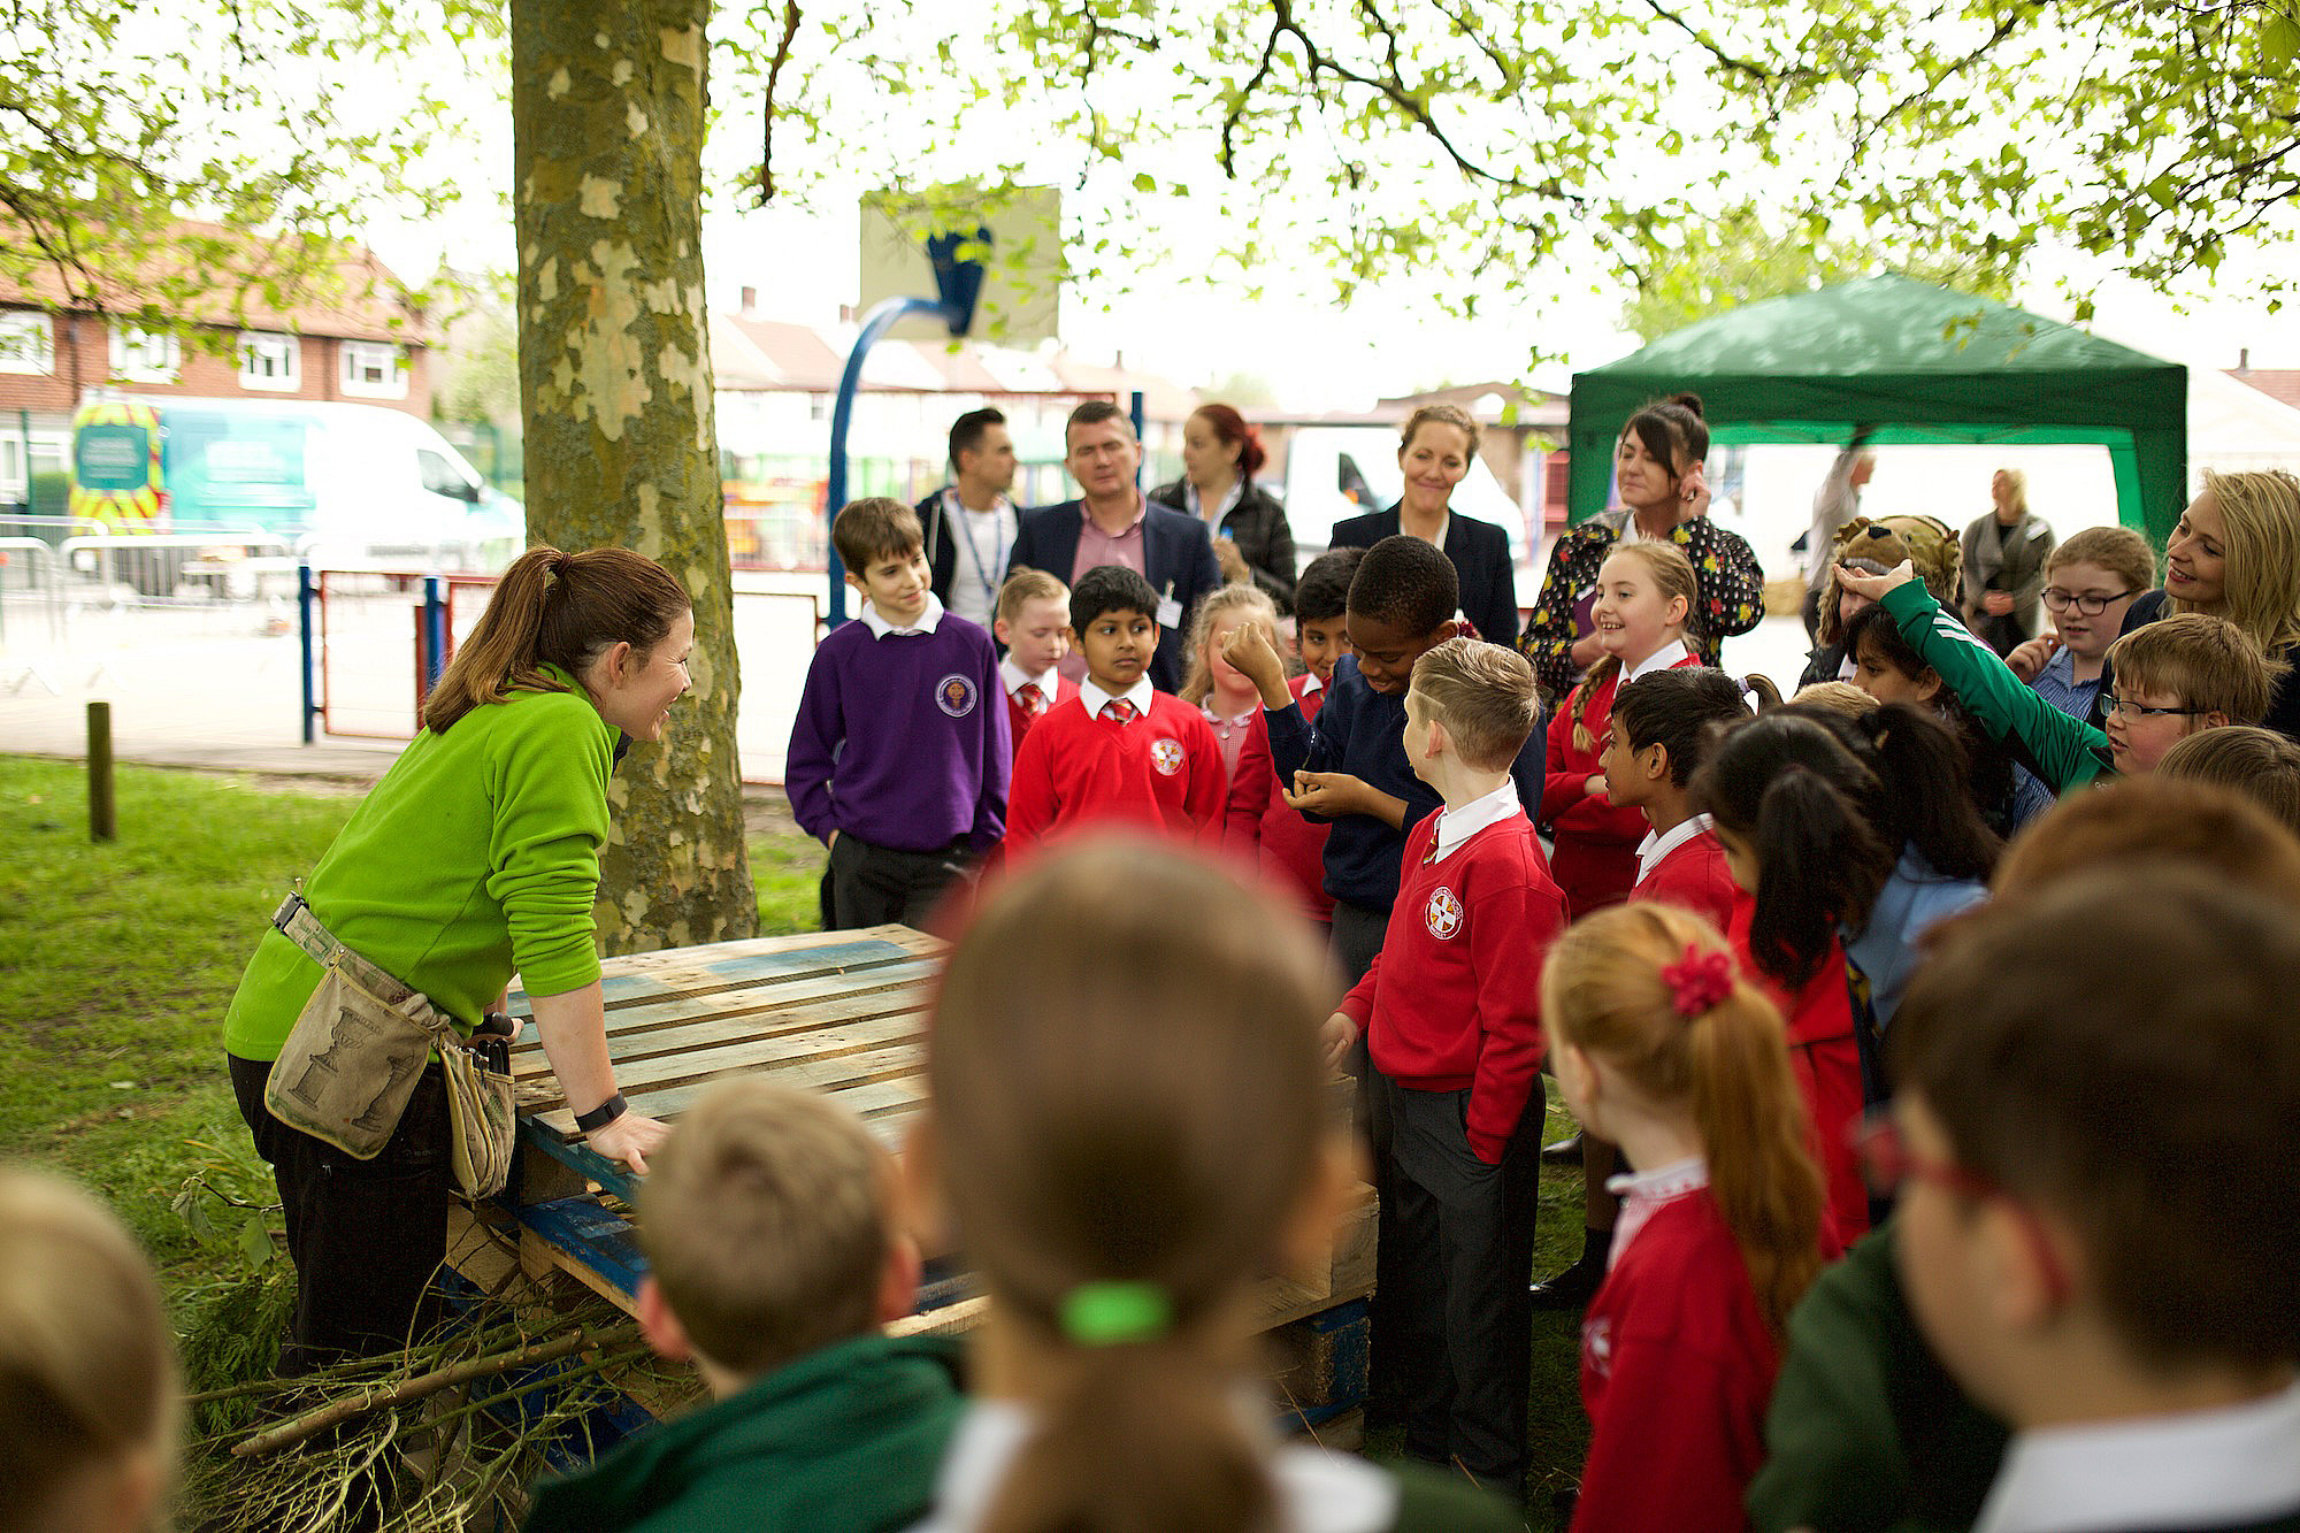 Outdoor learning curriculum at work event - May 2016